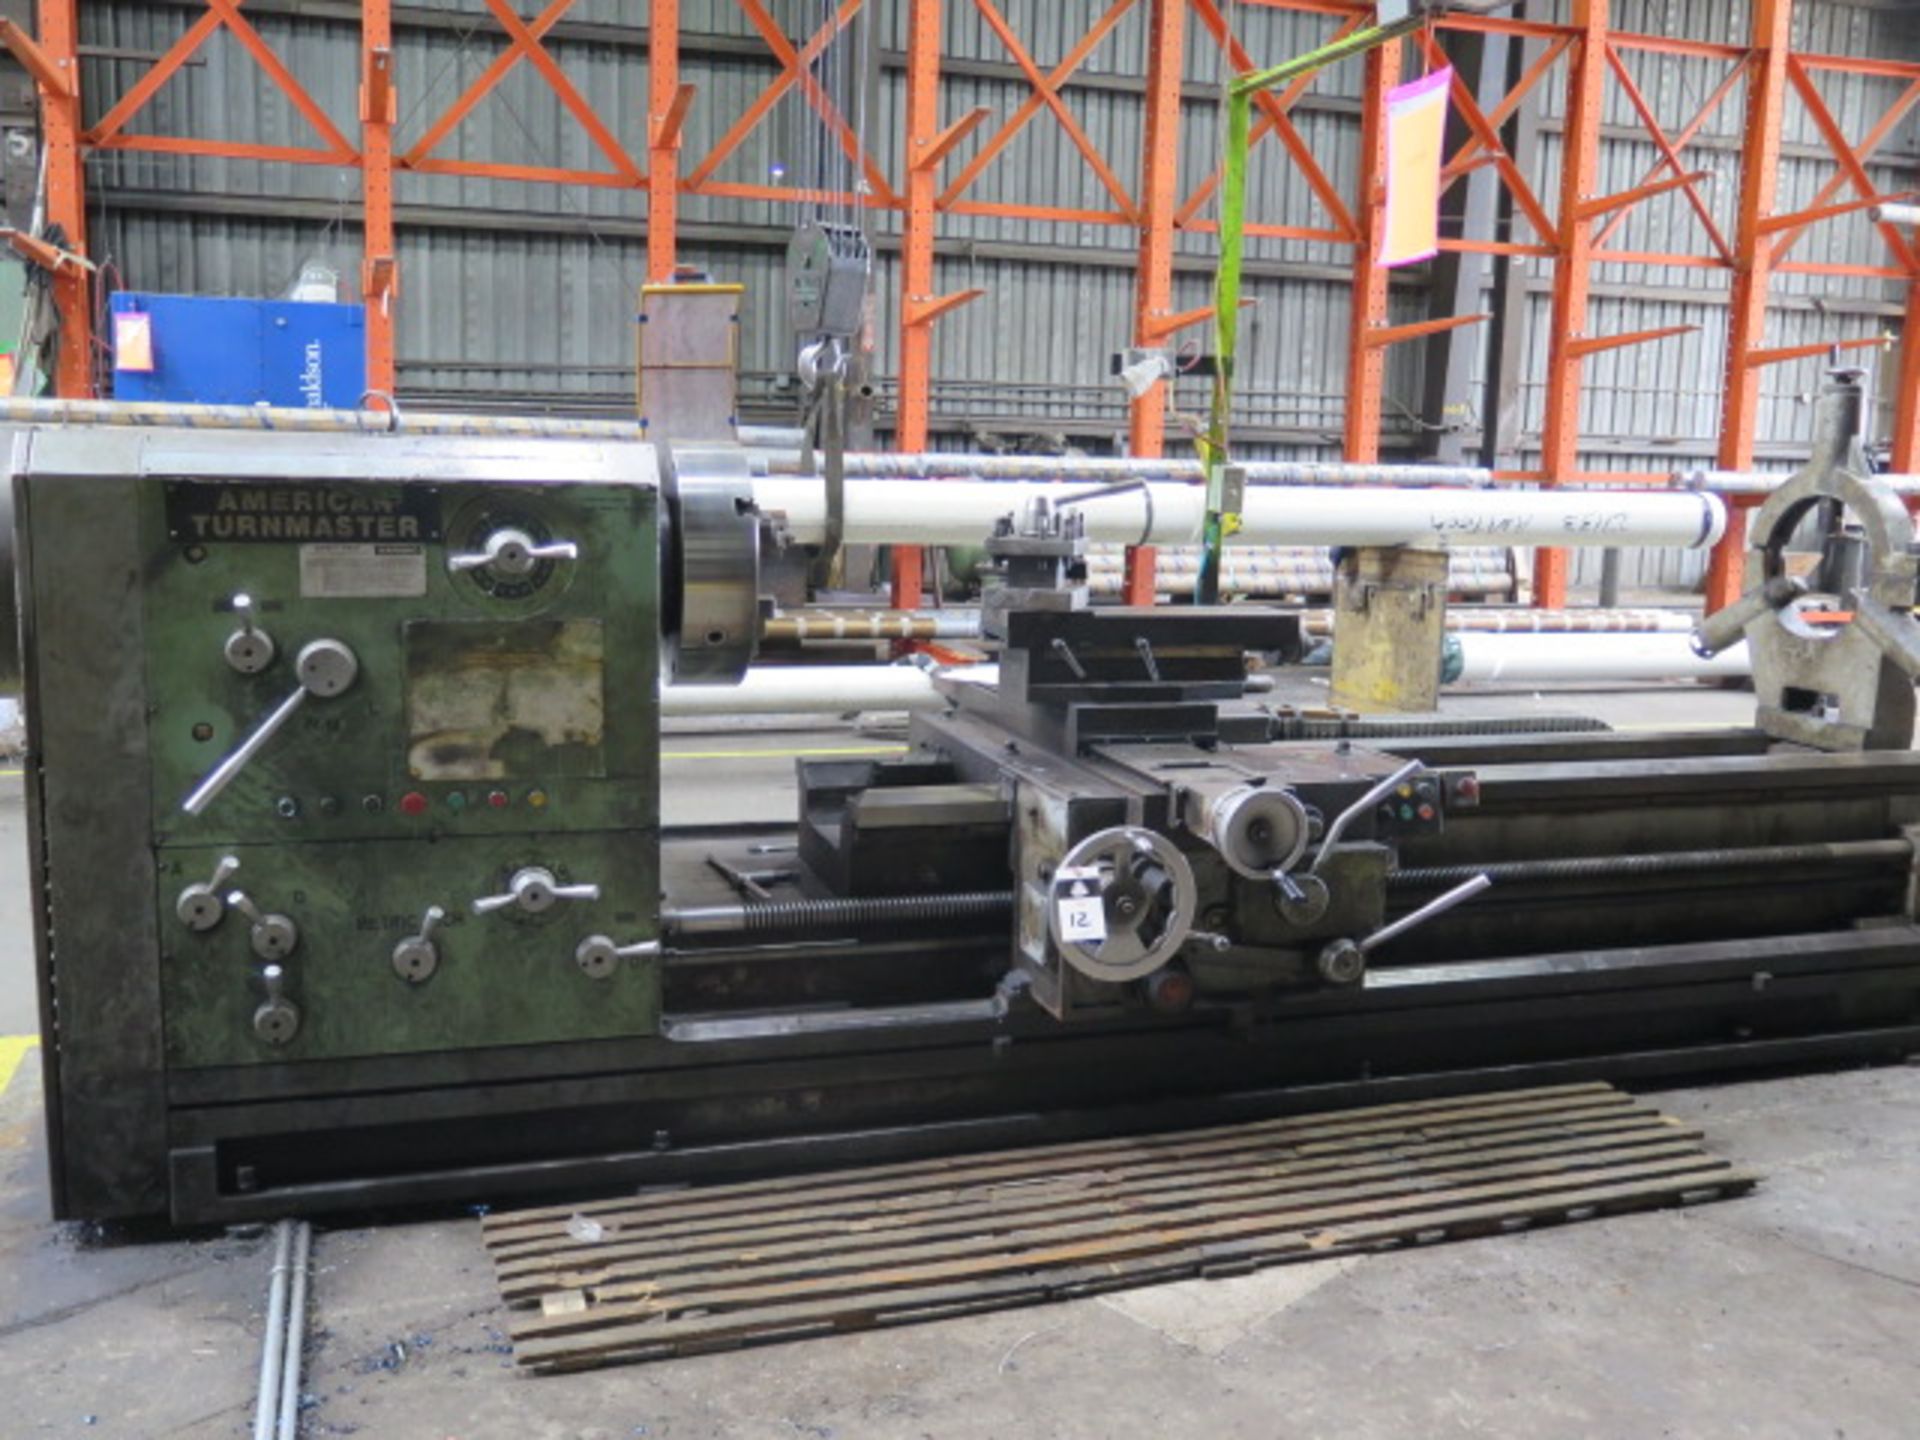 American Turnmaster HT-3580 35” x 80” Big Bore Geared Gap Bed Lathe w/ 6” Spindle Bore, SOLD AS IS